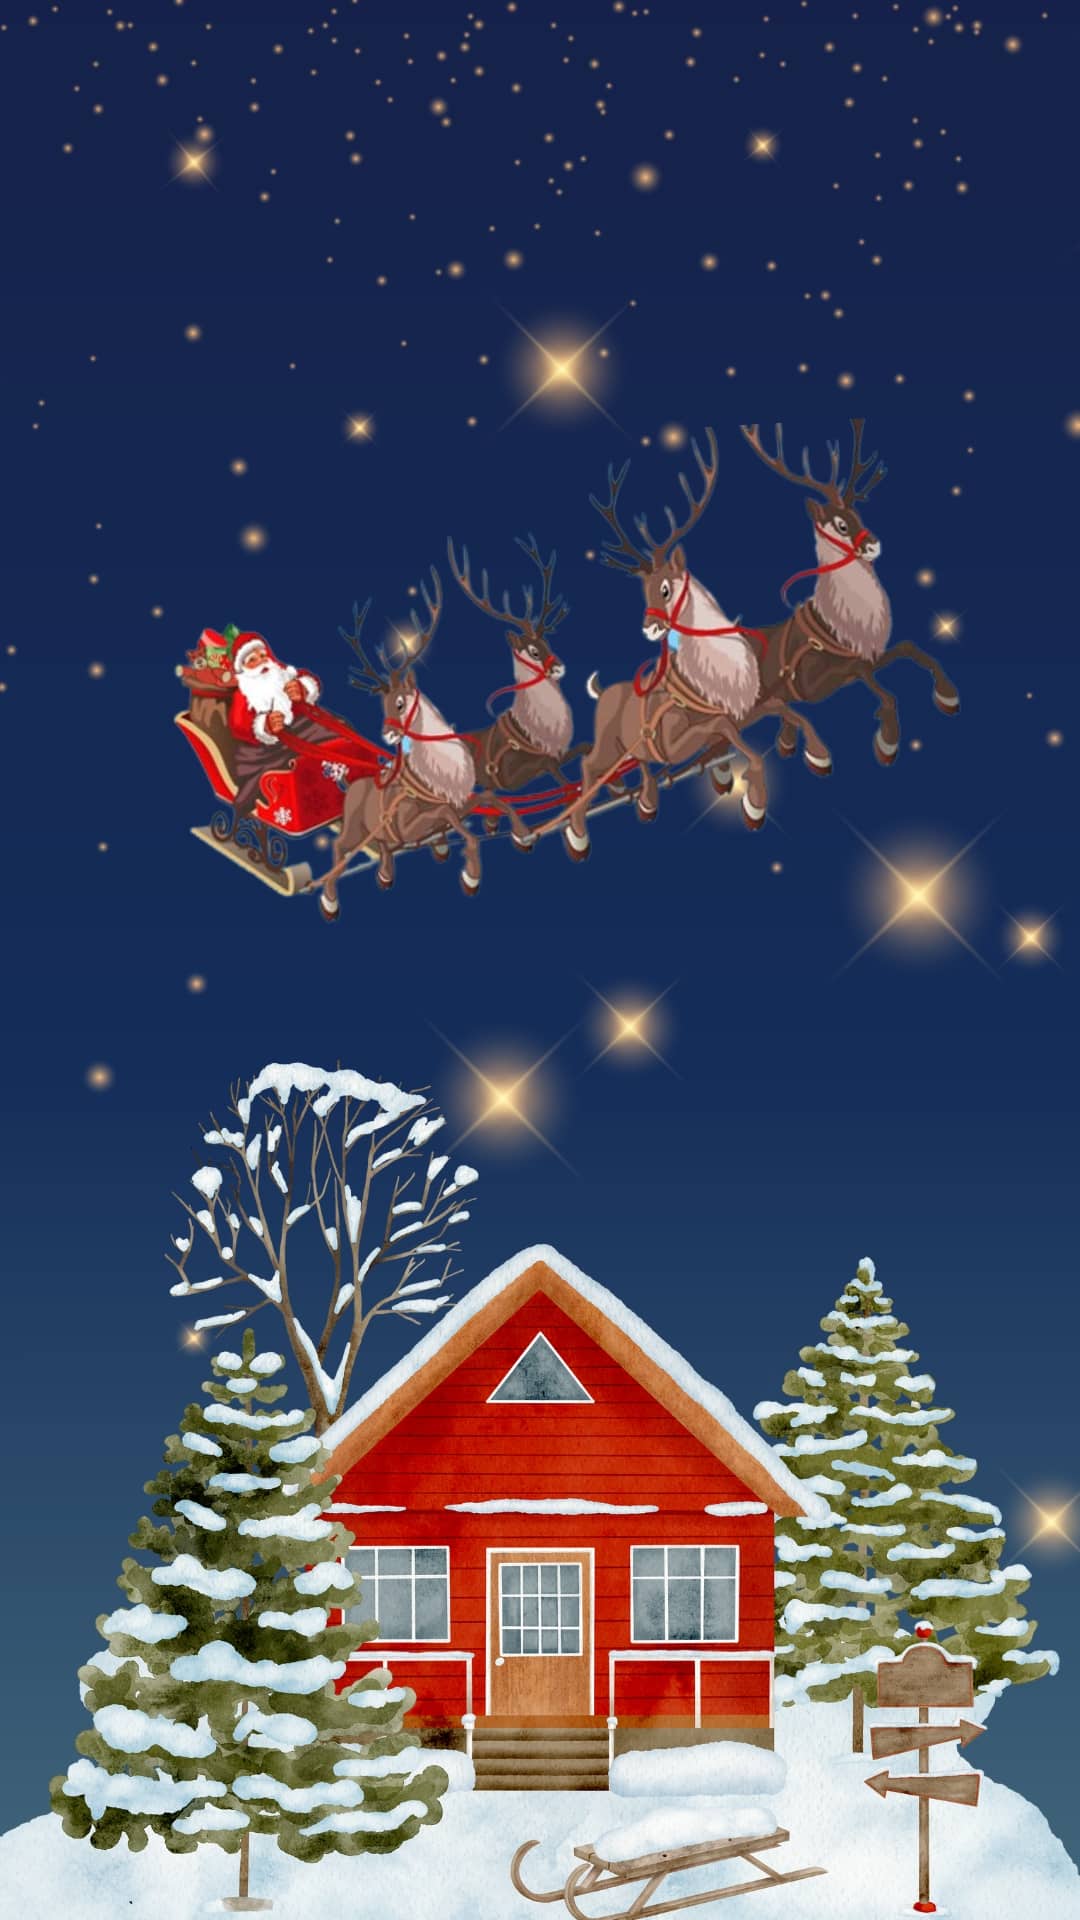 Blue night sky background with Santa and his sleigh flying over a red house. 